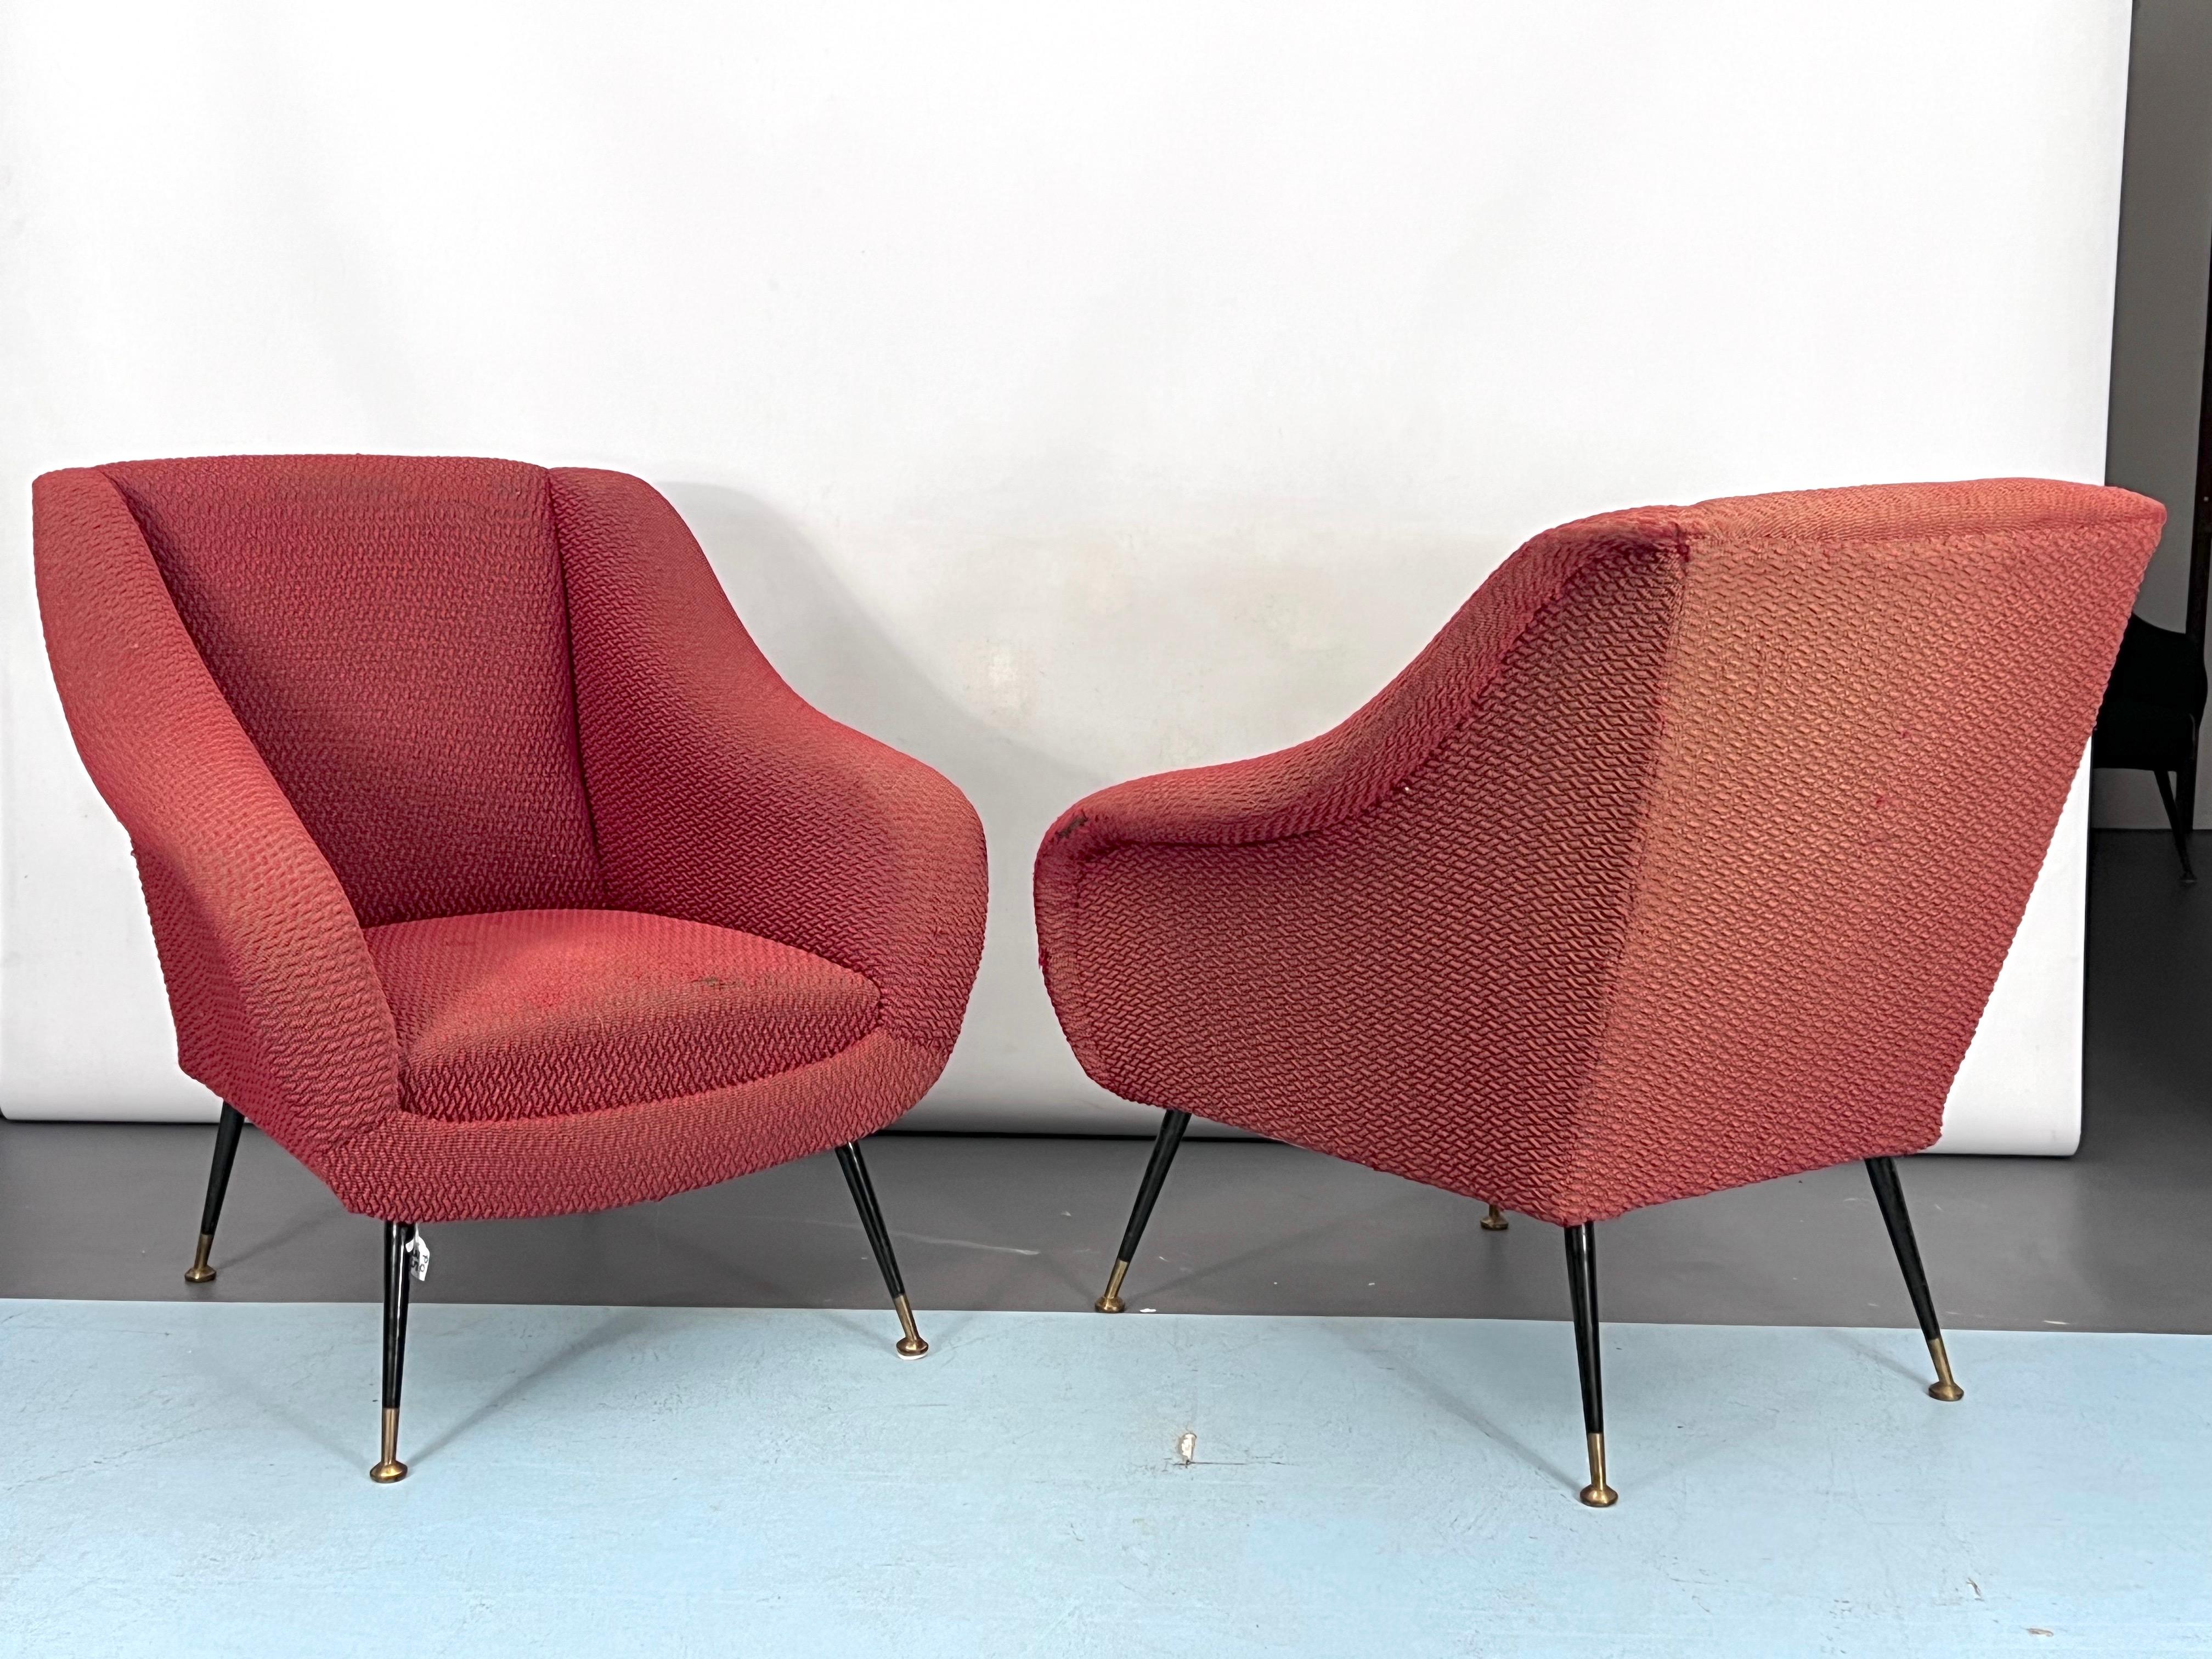 Brass Mid-Century Pair of Lounge Chairs by Gigi Radice for Minotti, Italy, 1950s For Sale